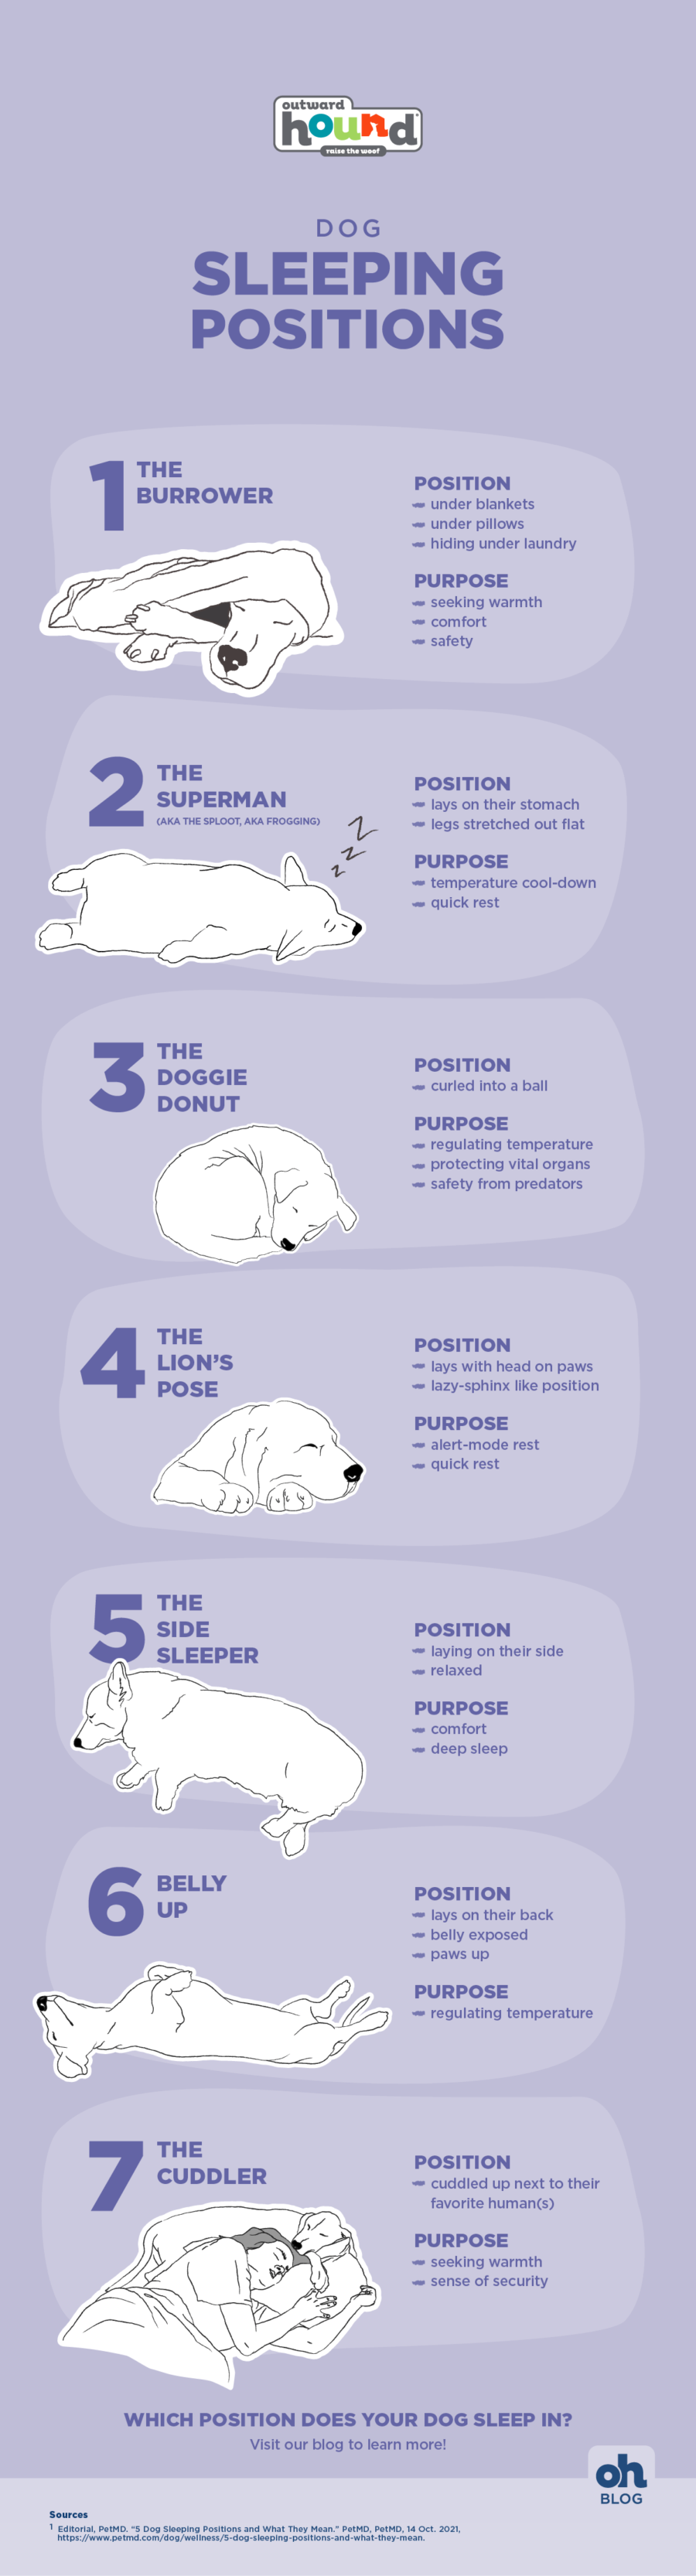 couple sleeping positions and what they mean